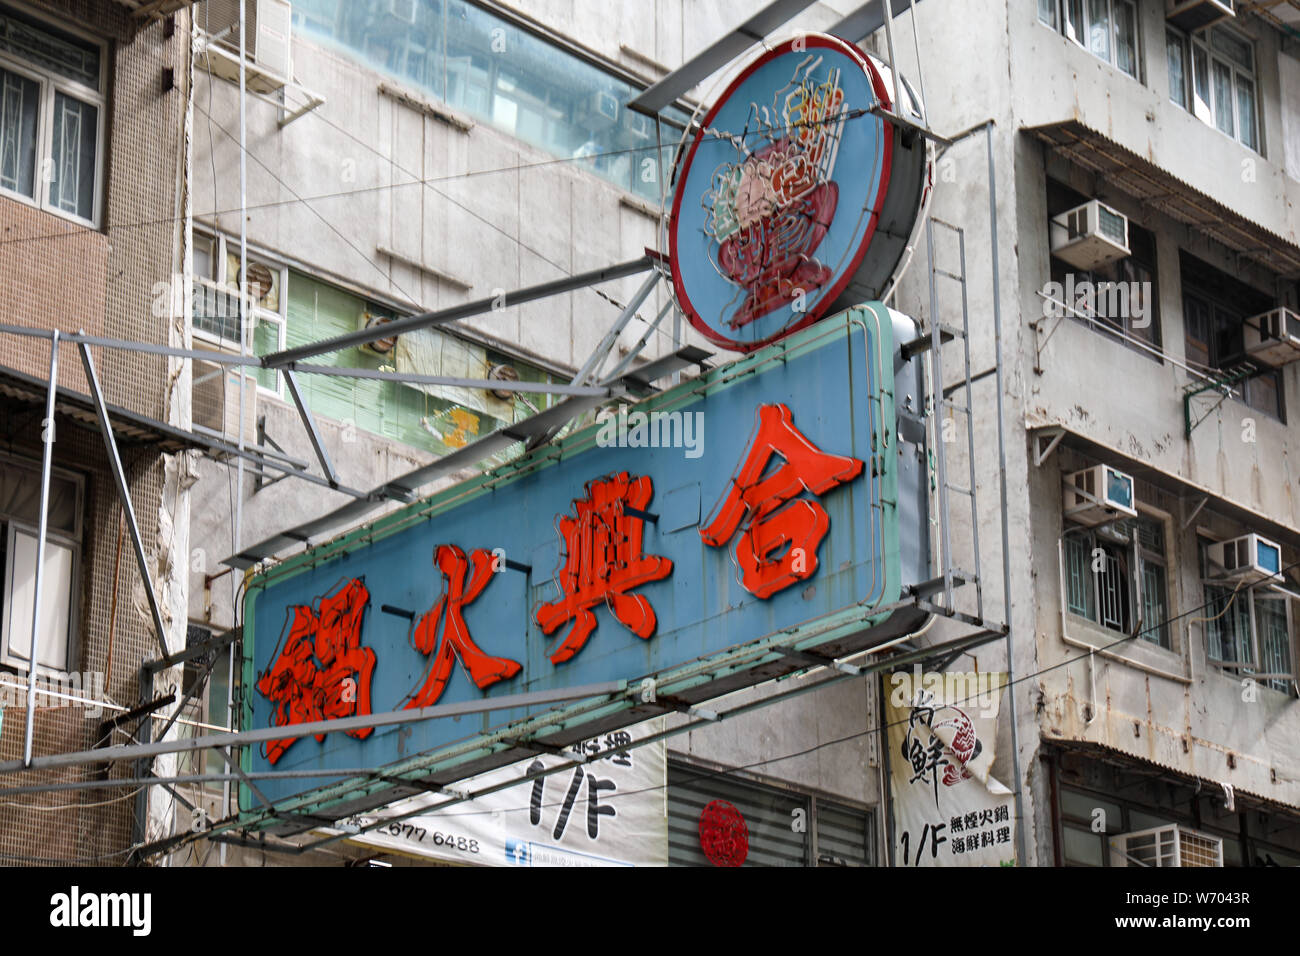 Daytime image of weathered old neon sign with Chinese characters in Yau Ma Tei, Hong Kong Stock Photo